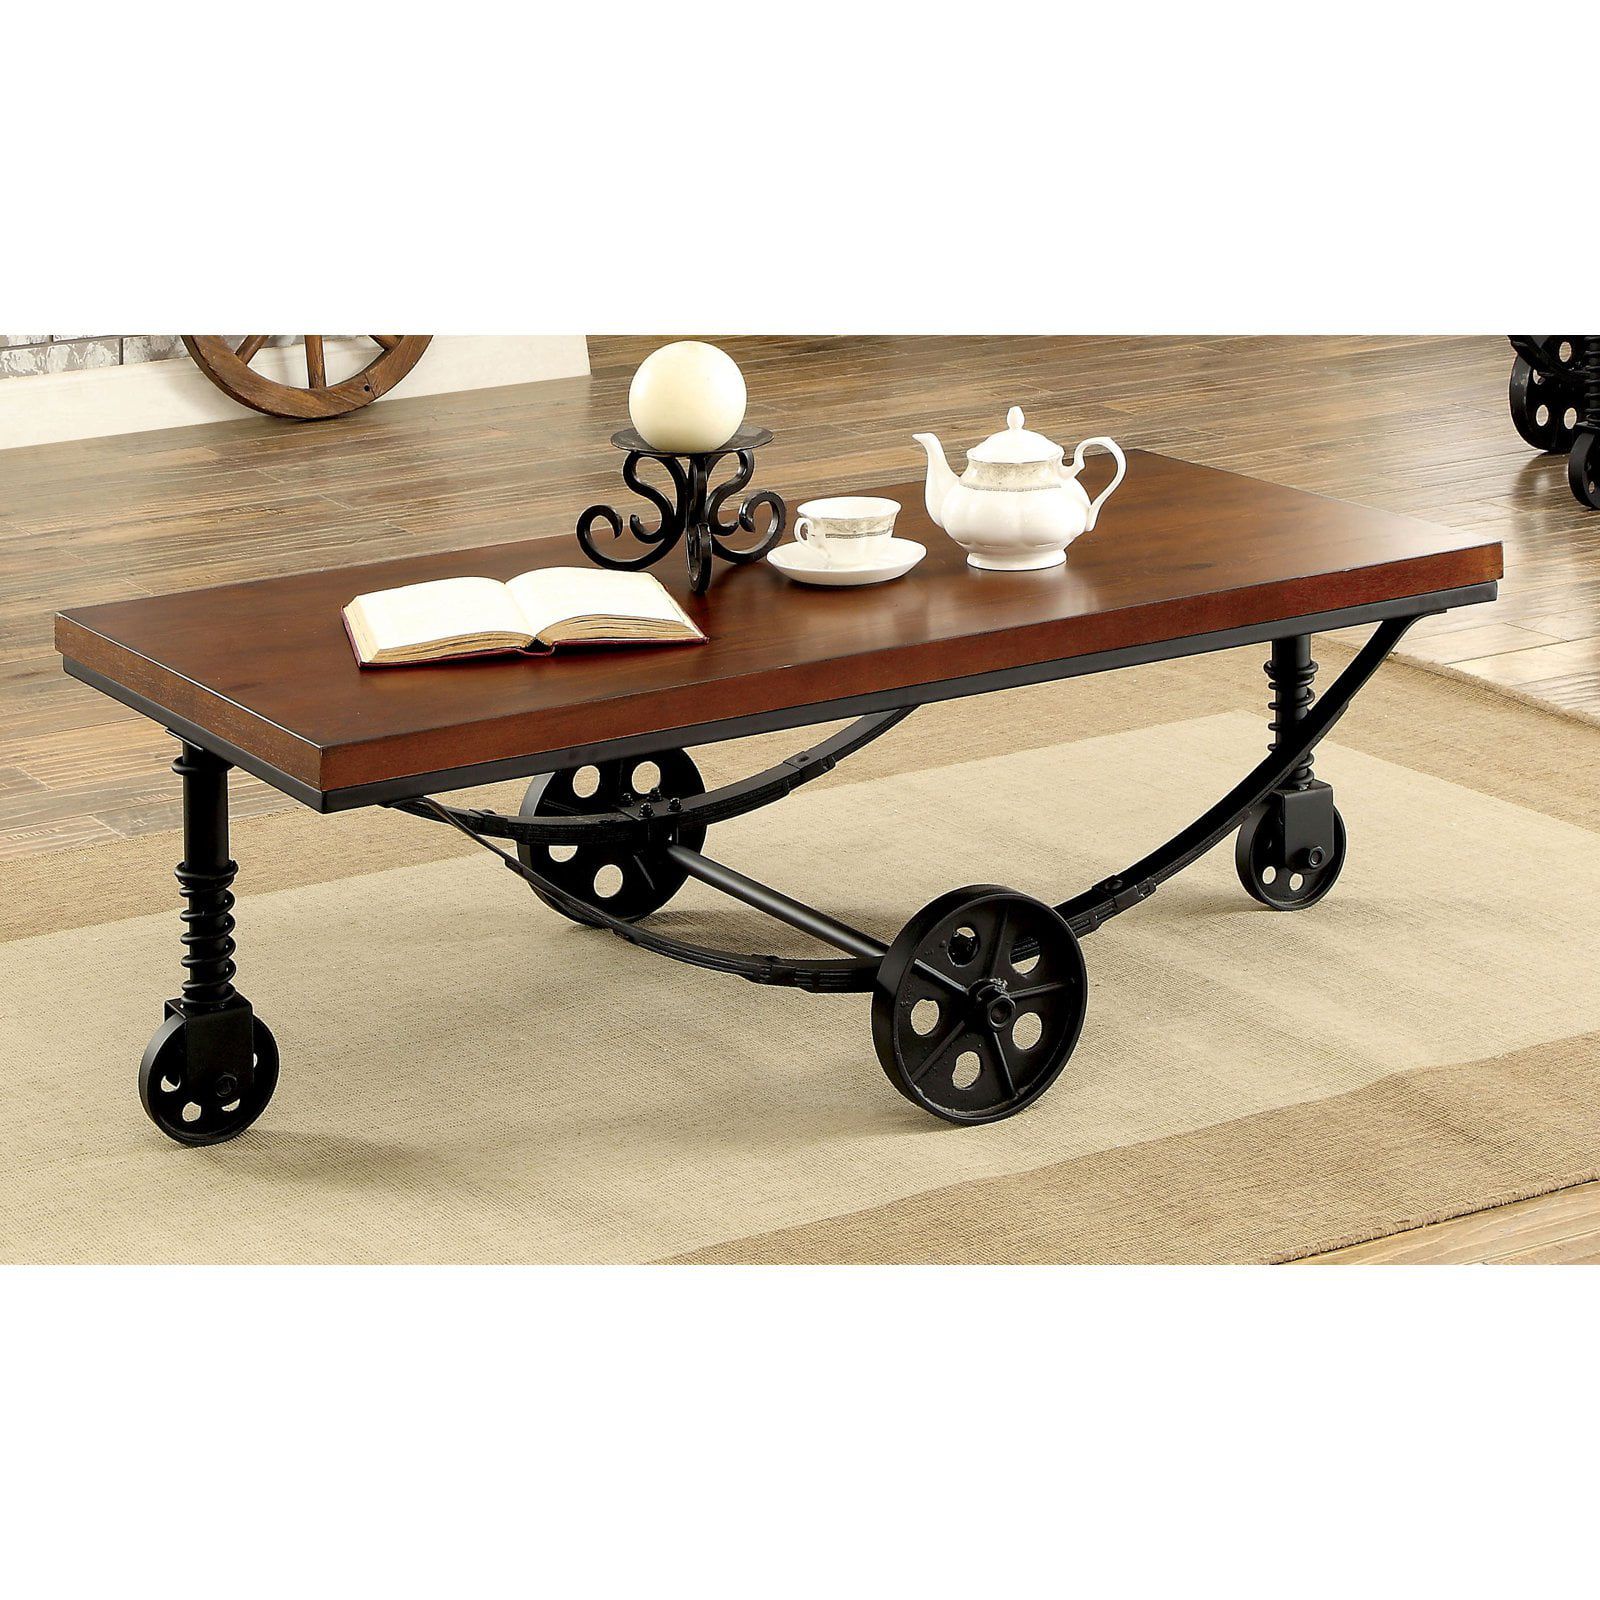 Furniture Of America Mator Industrial Style Caster Wheel Coffee Table Throughout Coffee Tables With Casters (Gallery 3 of 21)